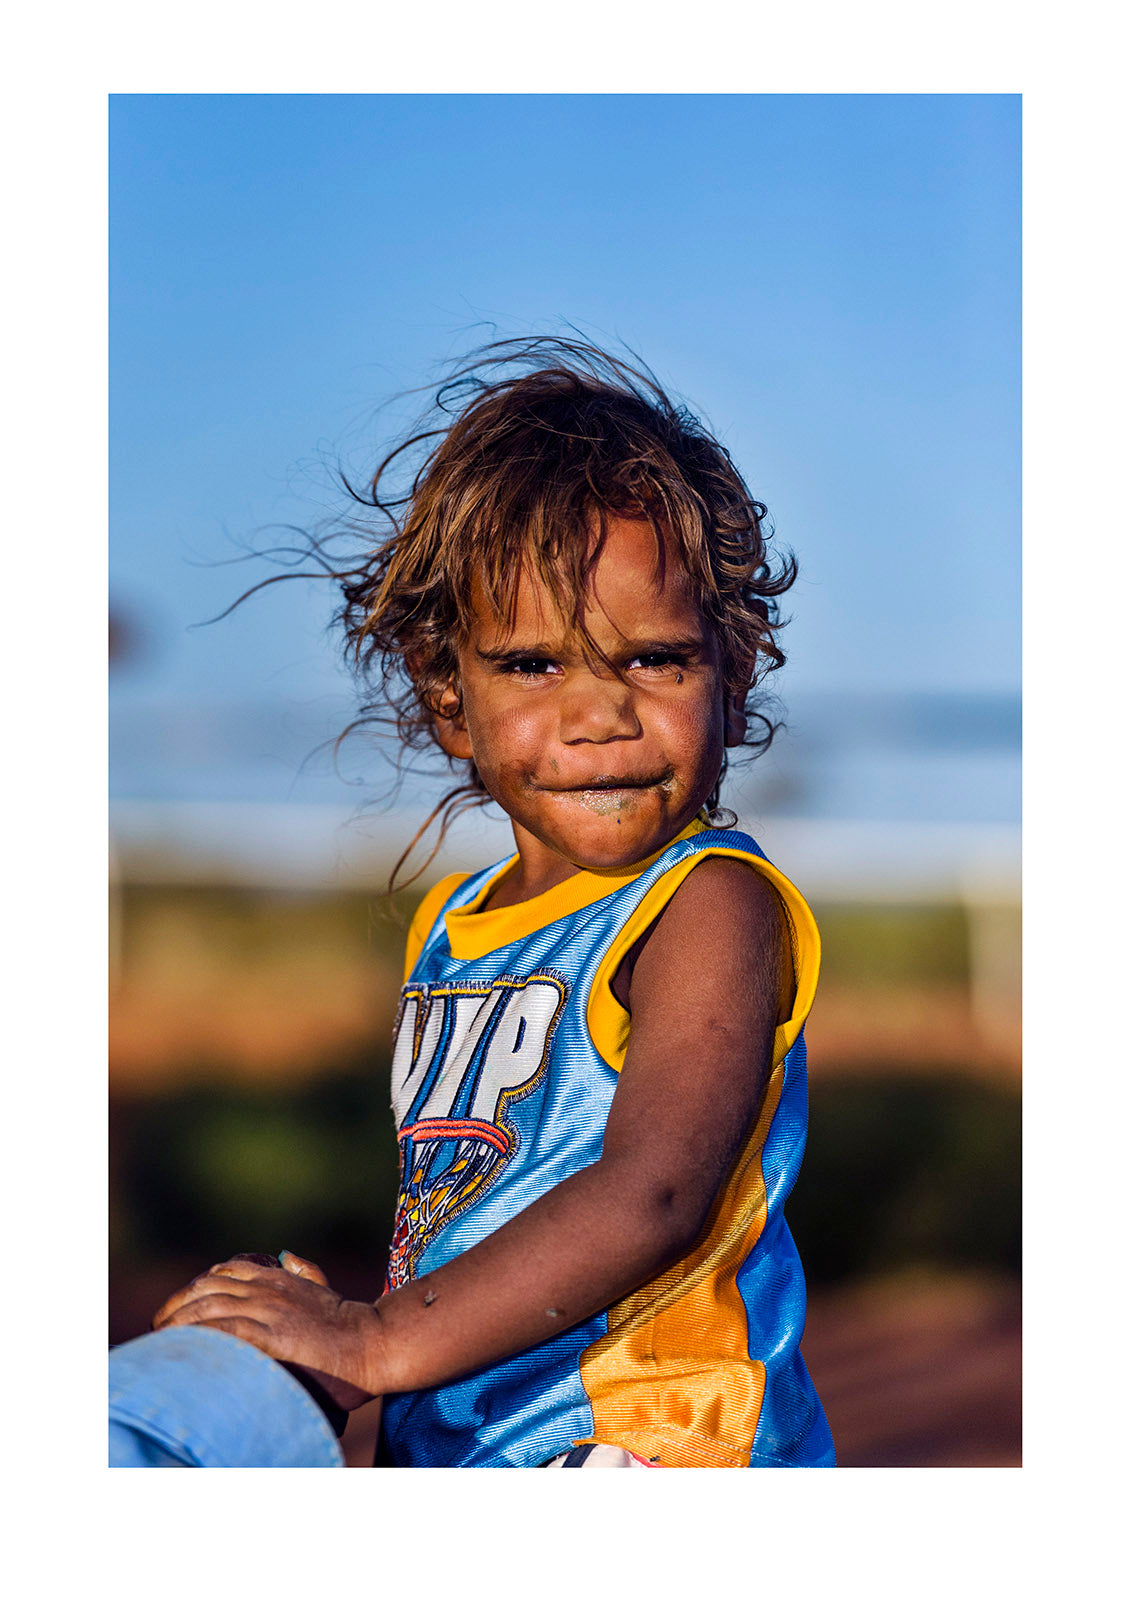 There are times when you come across a human face that speaks beyond the years of its owner; a face born of community forged over countless millennia. And then sometimes it’s just smiles emanating joy from a child.  Ntaria, Hermannsburg, Northern Territory, Australia.